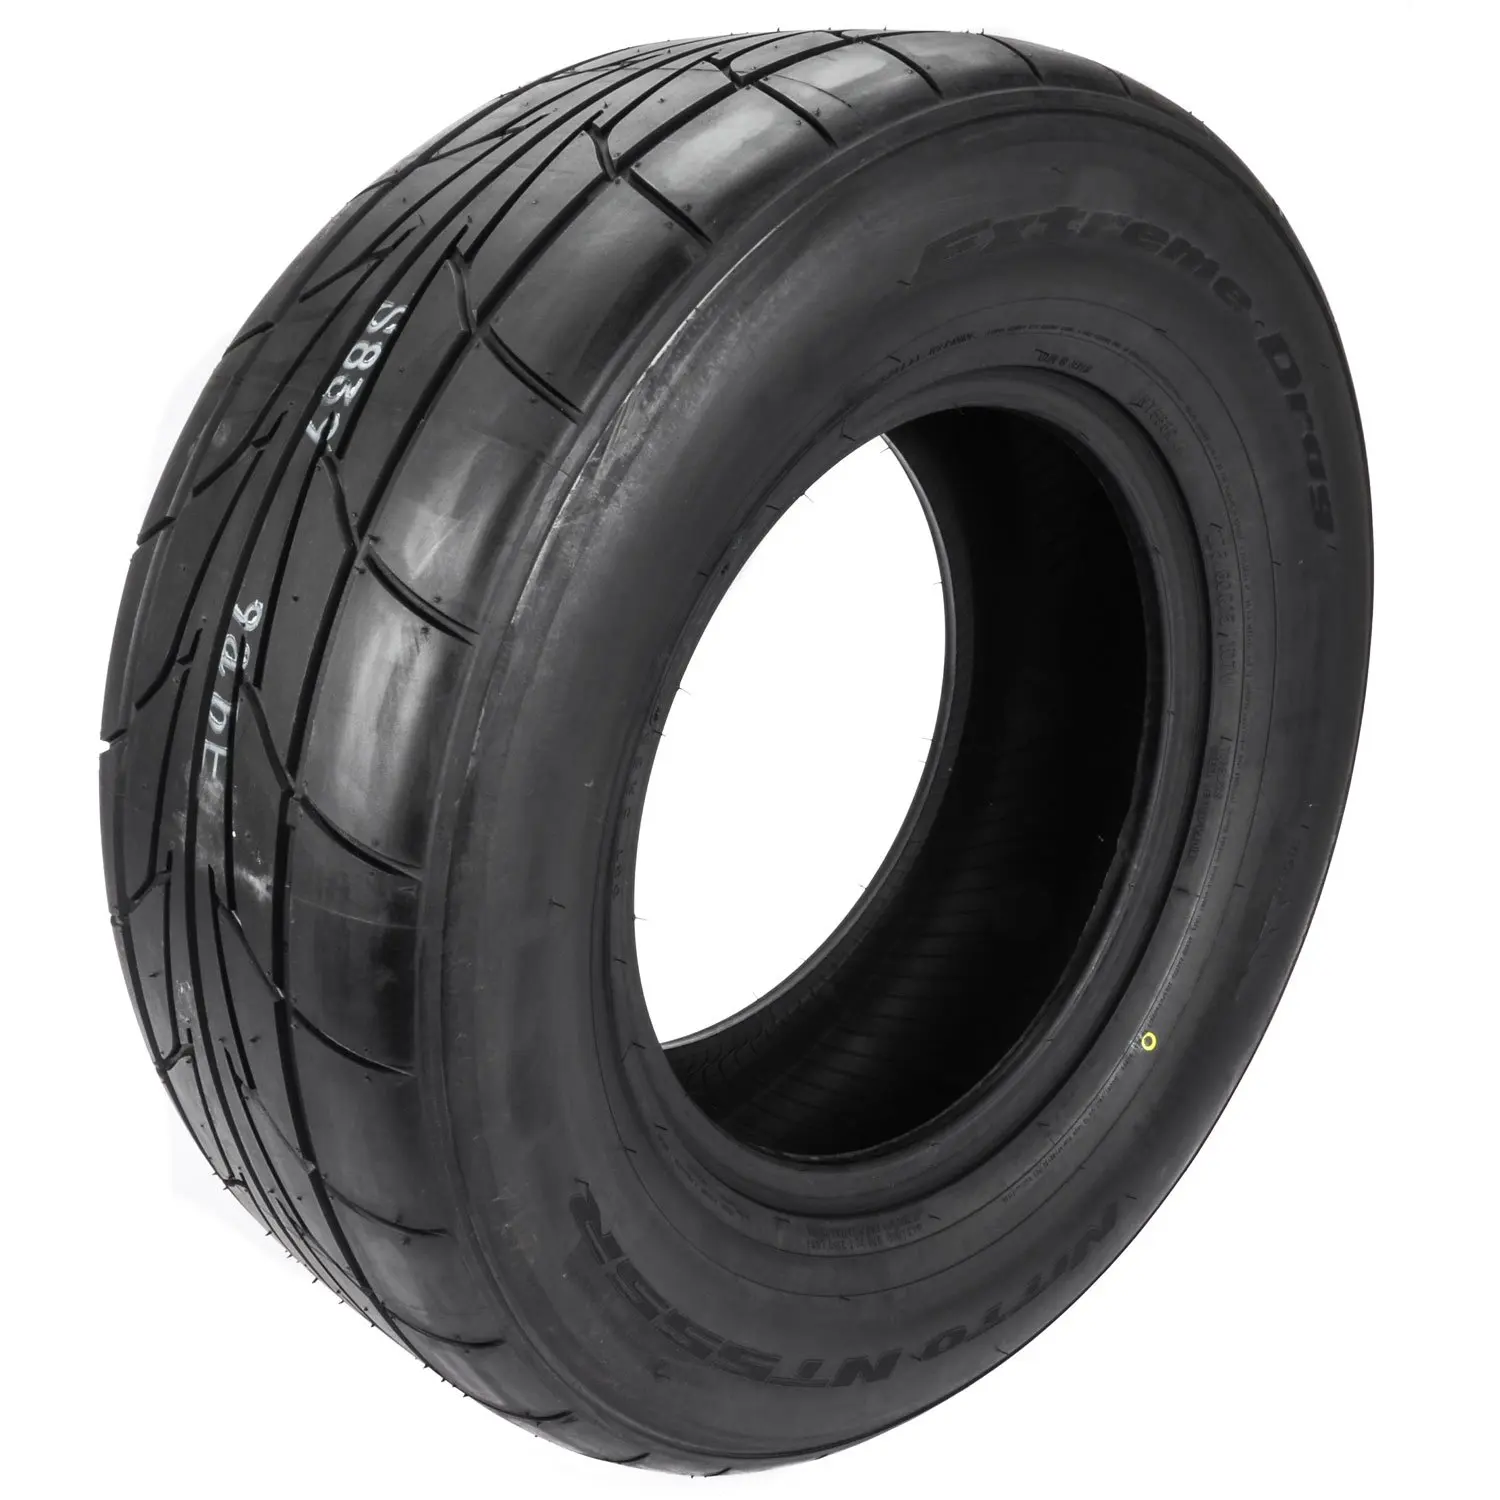 Nitto 40206 Nitto NT555R Extreme Drag Radial Tire 275/60R15 Load ...